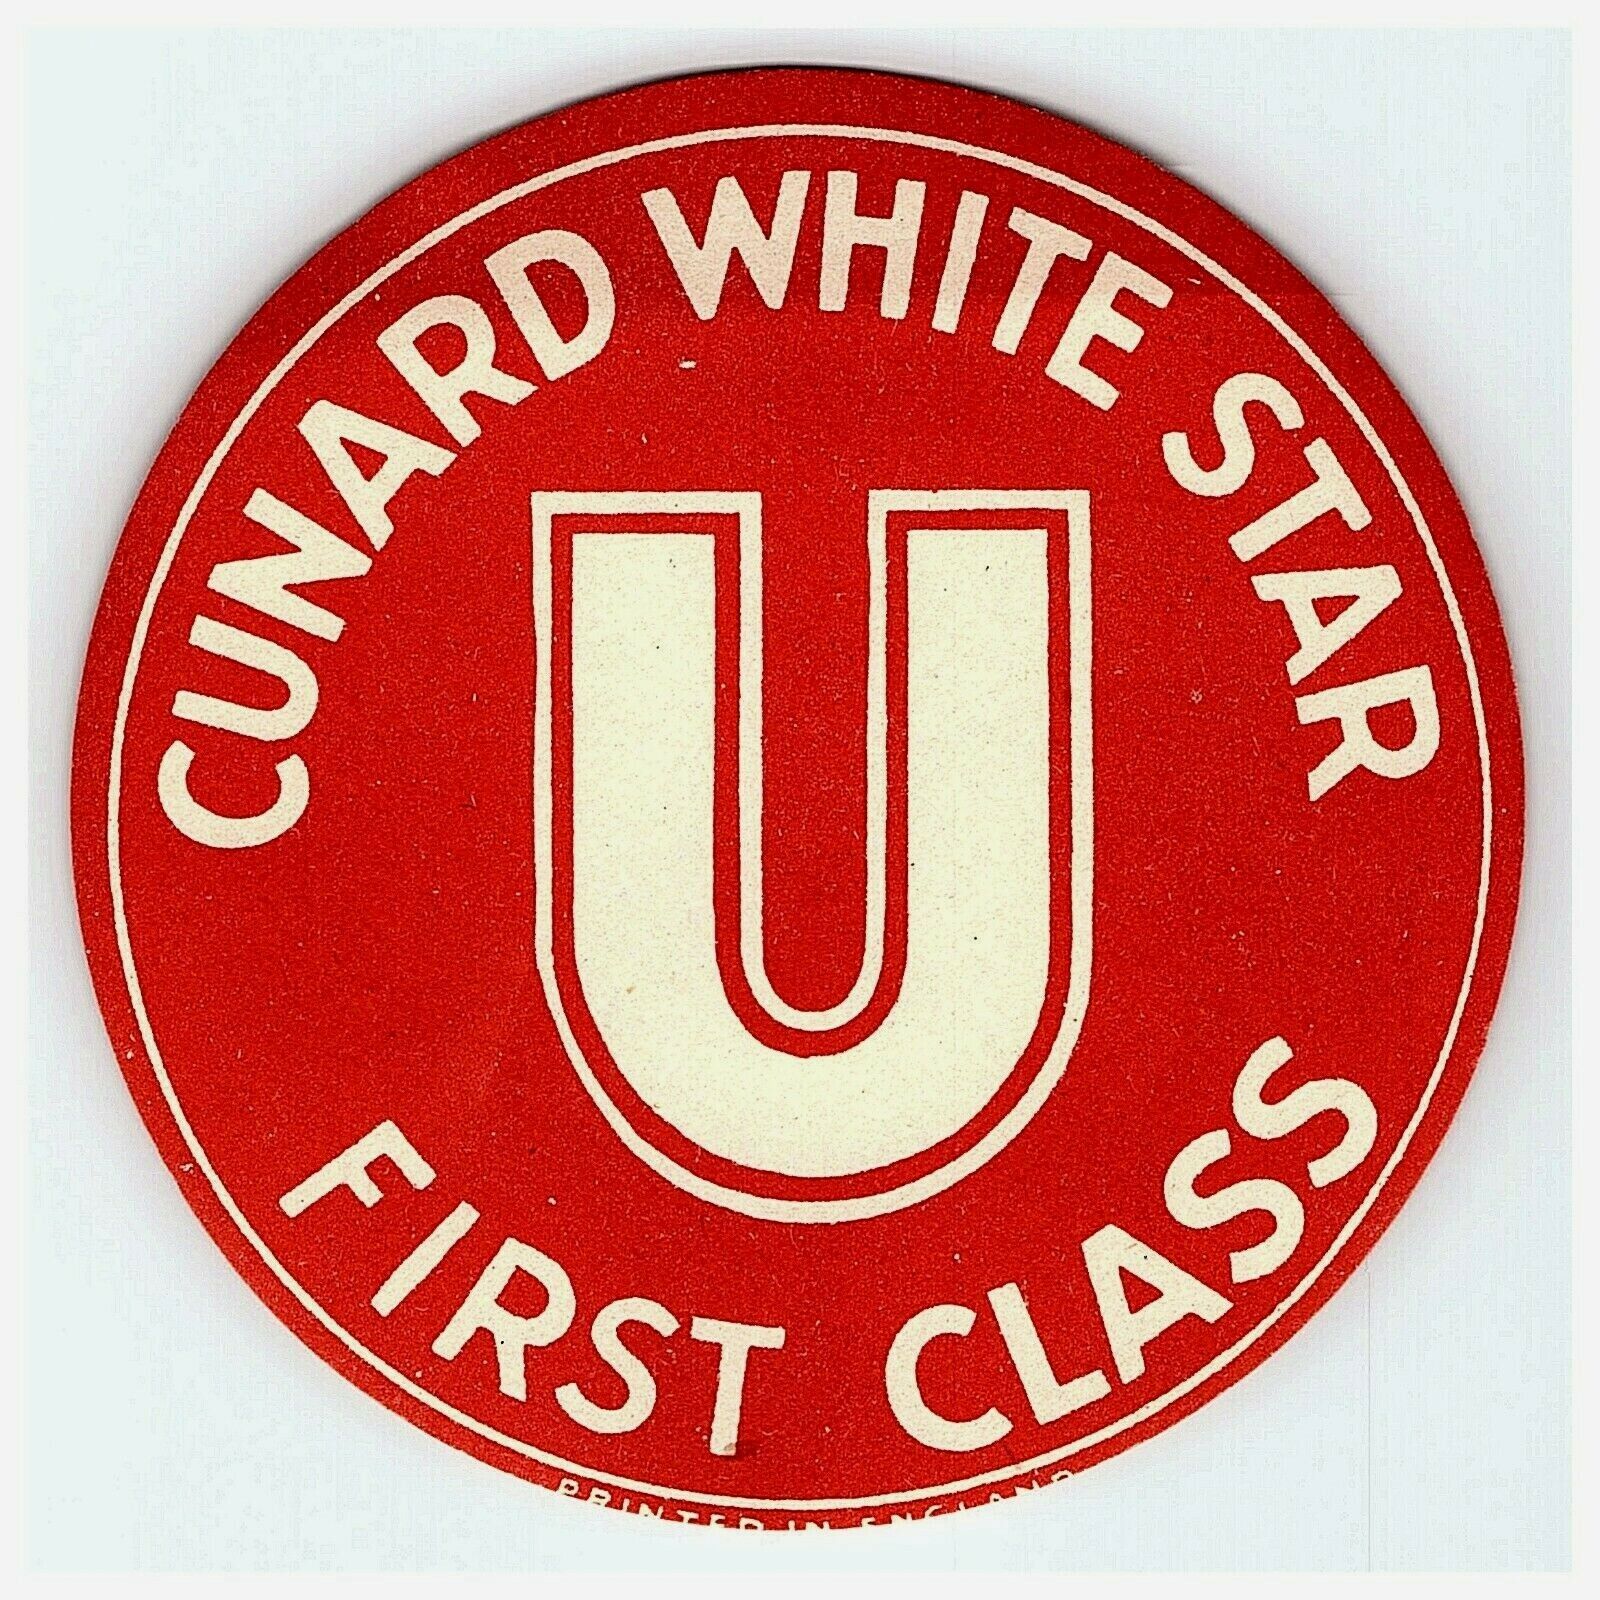 1940s Cunard White Star First Class Luggage Label Vintage Sticker Stamp Poster